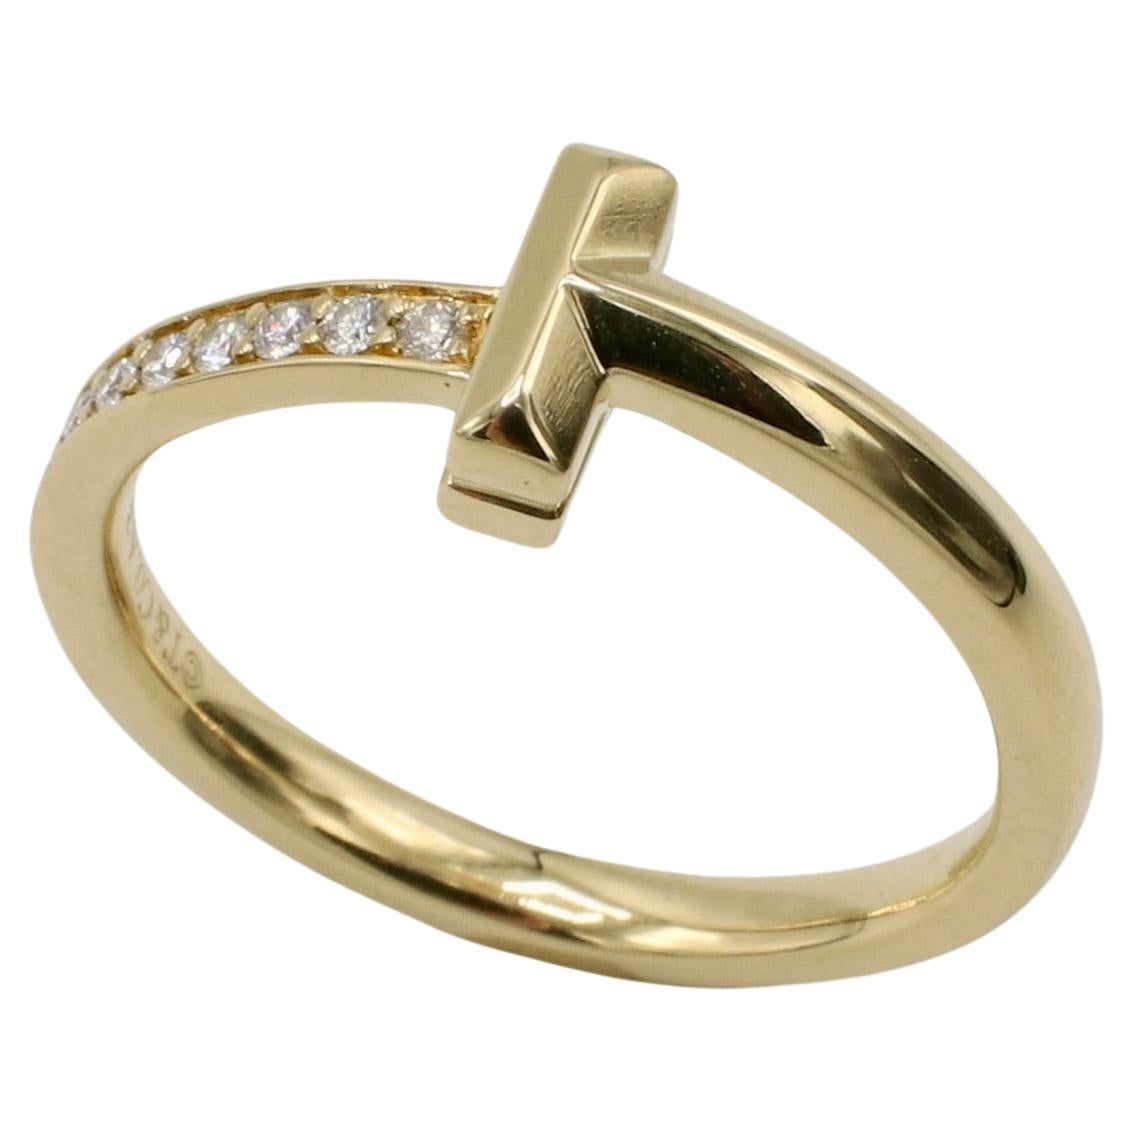 Tiffany & Co. Tiffany T1 Ring in Yellow Gold Natural Diamonds Band Ring 
Metal: 18k yellow gold
Weight: 4.26 grams
Diamonds: Approx. .08 CTW E-F VS round natural diamonds
Size: 6.5 (US)
Signed: ©T&Co. Au750 ITALY
Band: 2.5mm
Retail: $2,350 USD